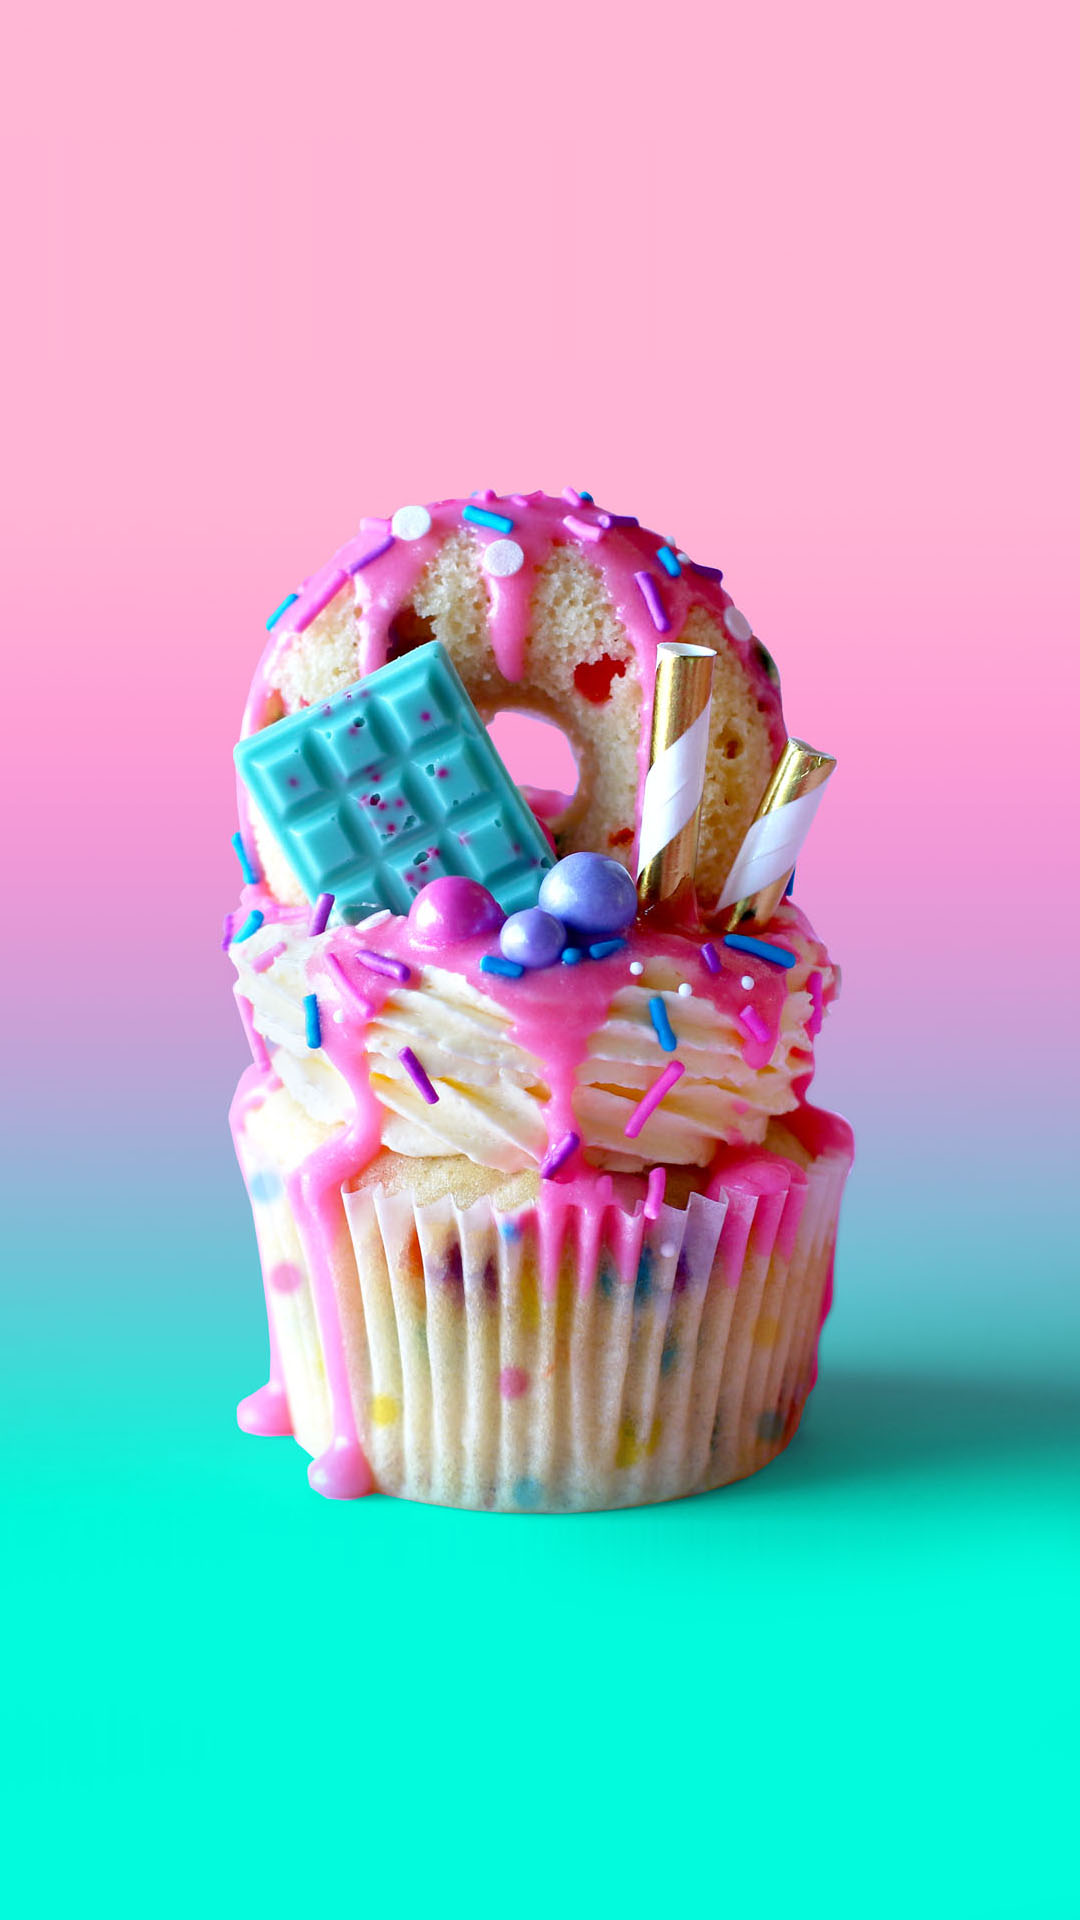 Image of a colorful cupcake.